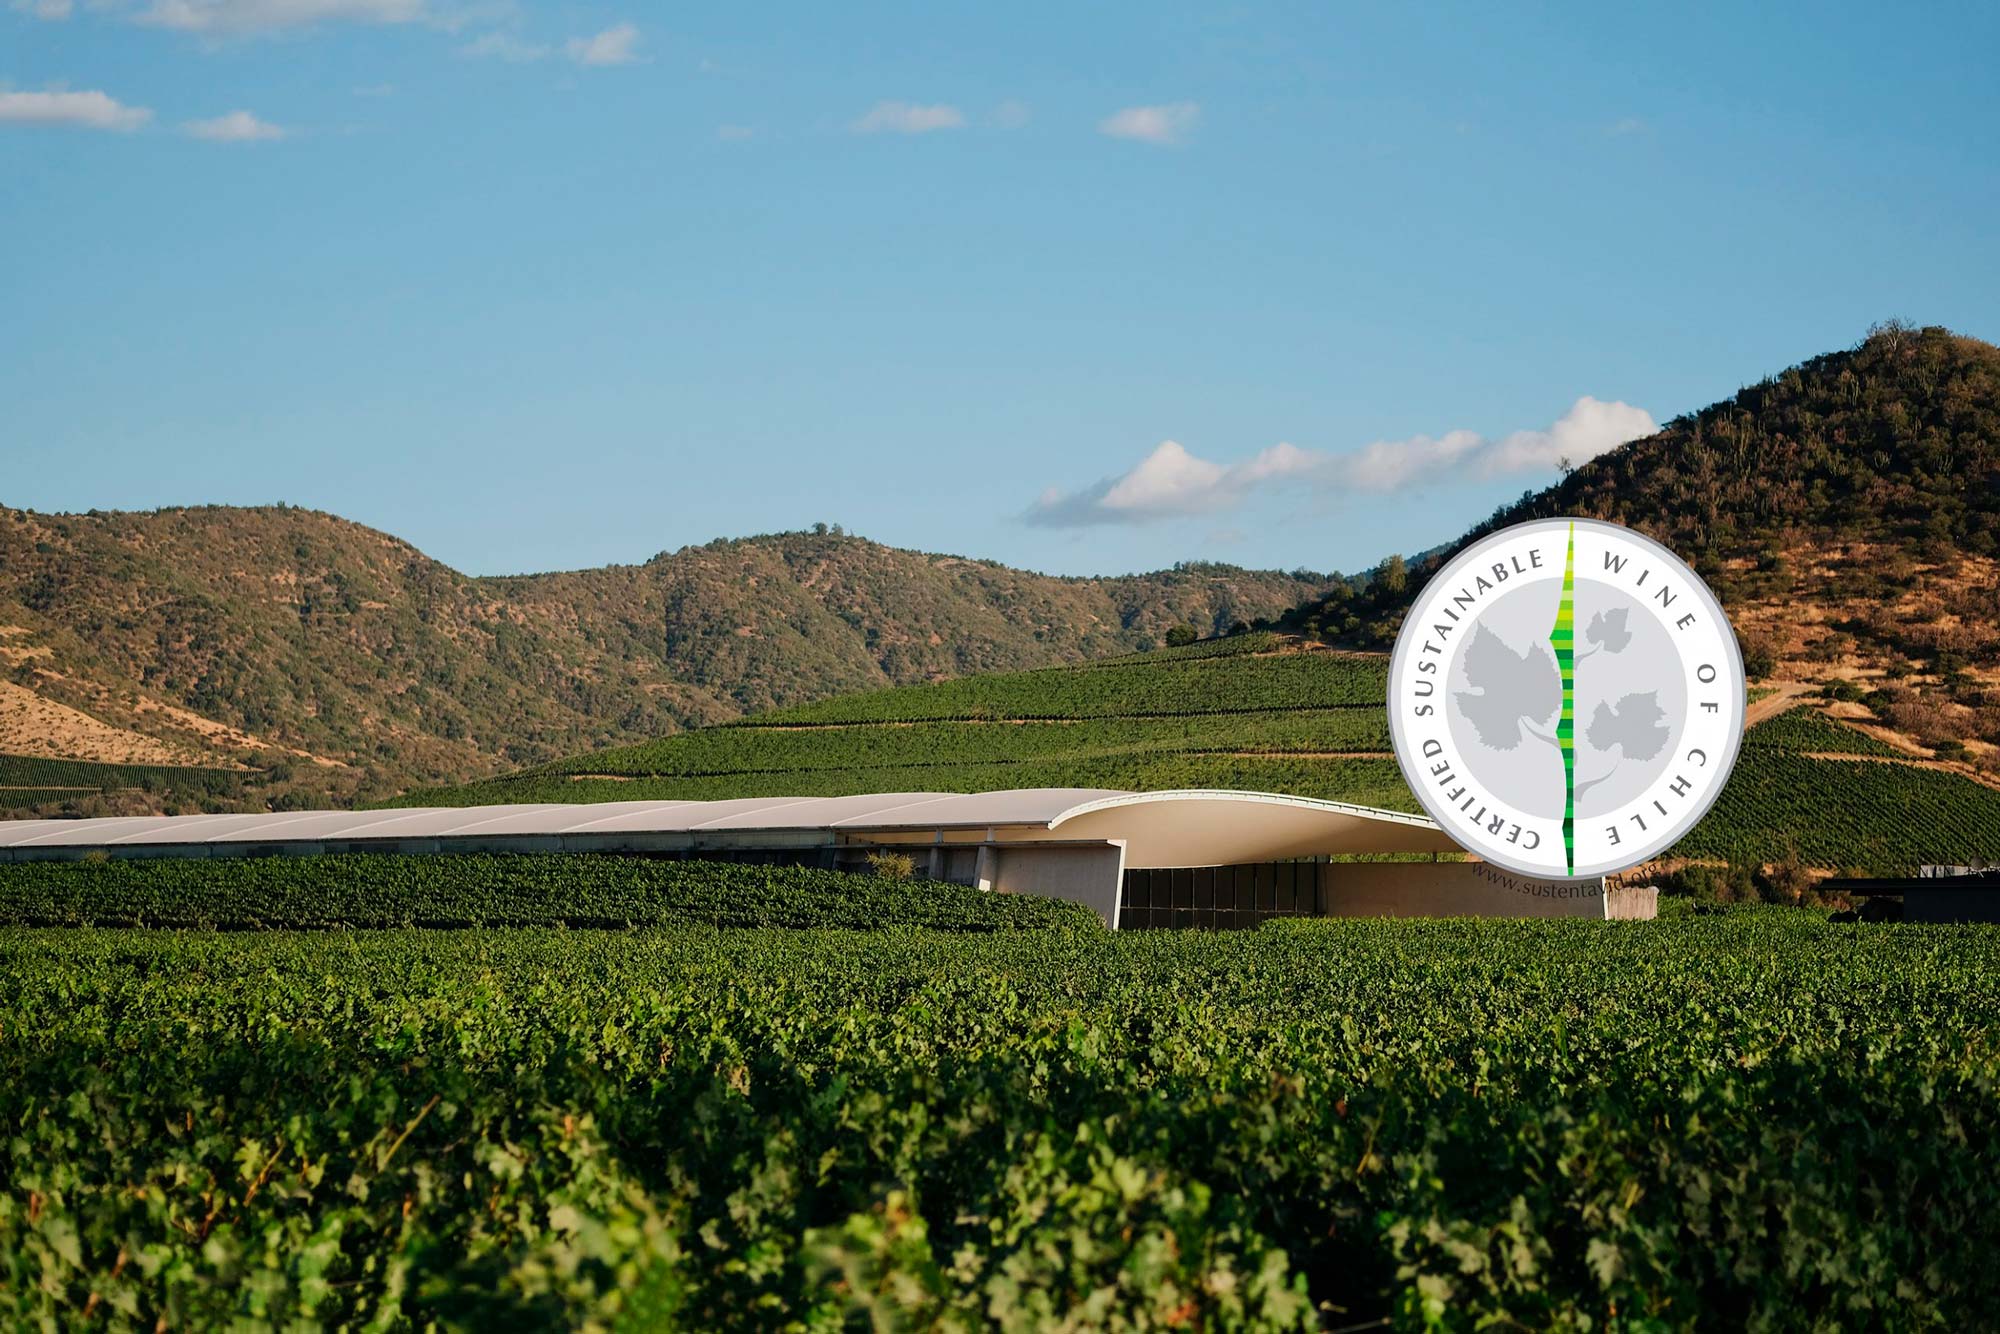 VIK OBTAINS CERTIFICATION UNDER THE SUSTAINABILITY CODE OF THE CHILEAN WINE INDUSTRY